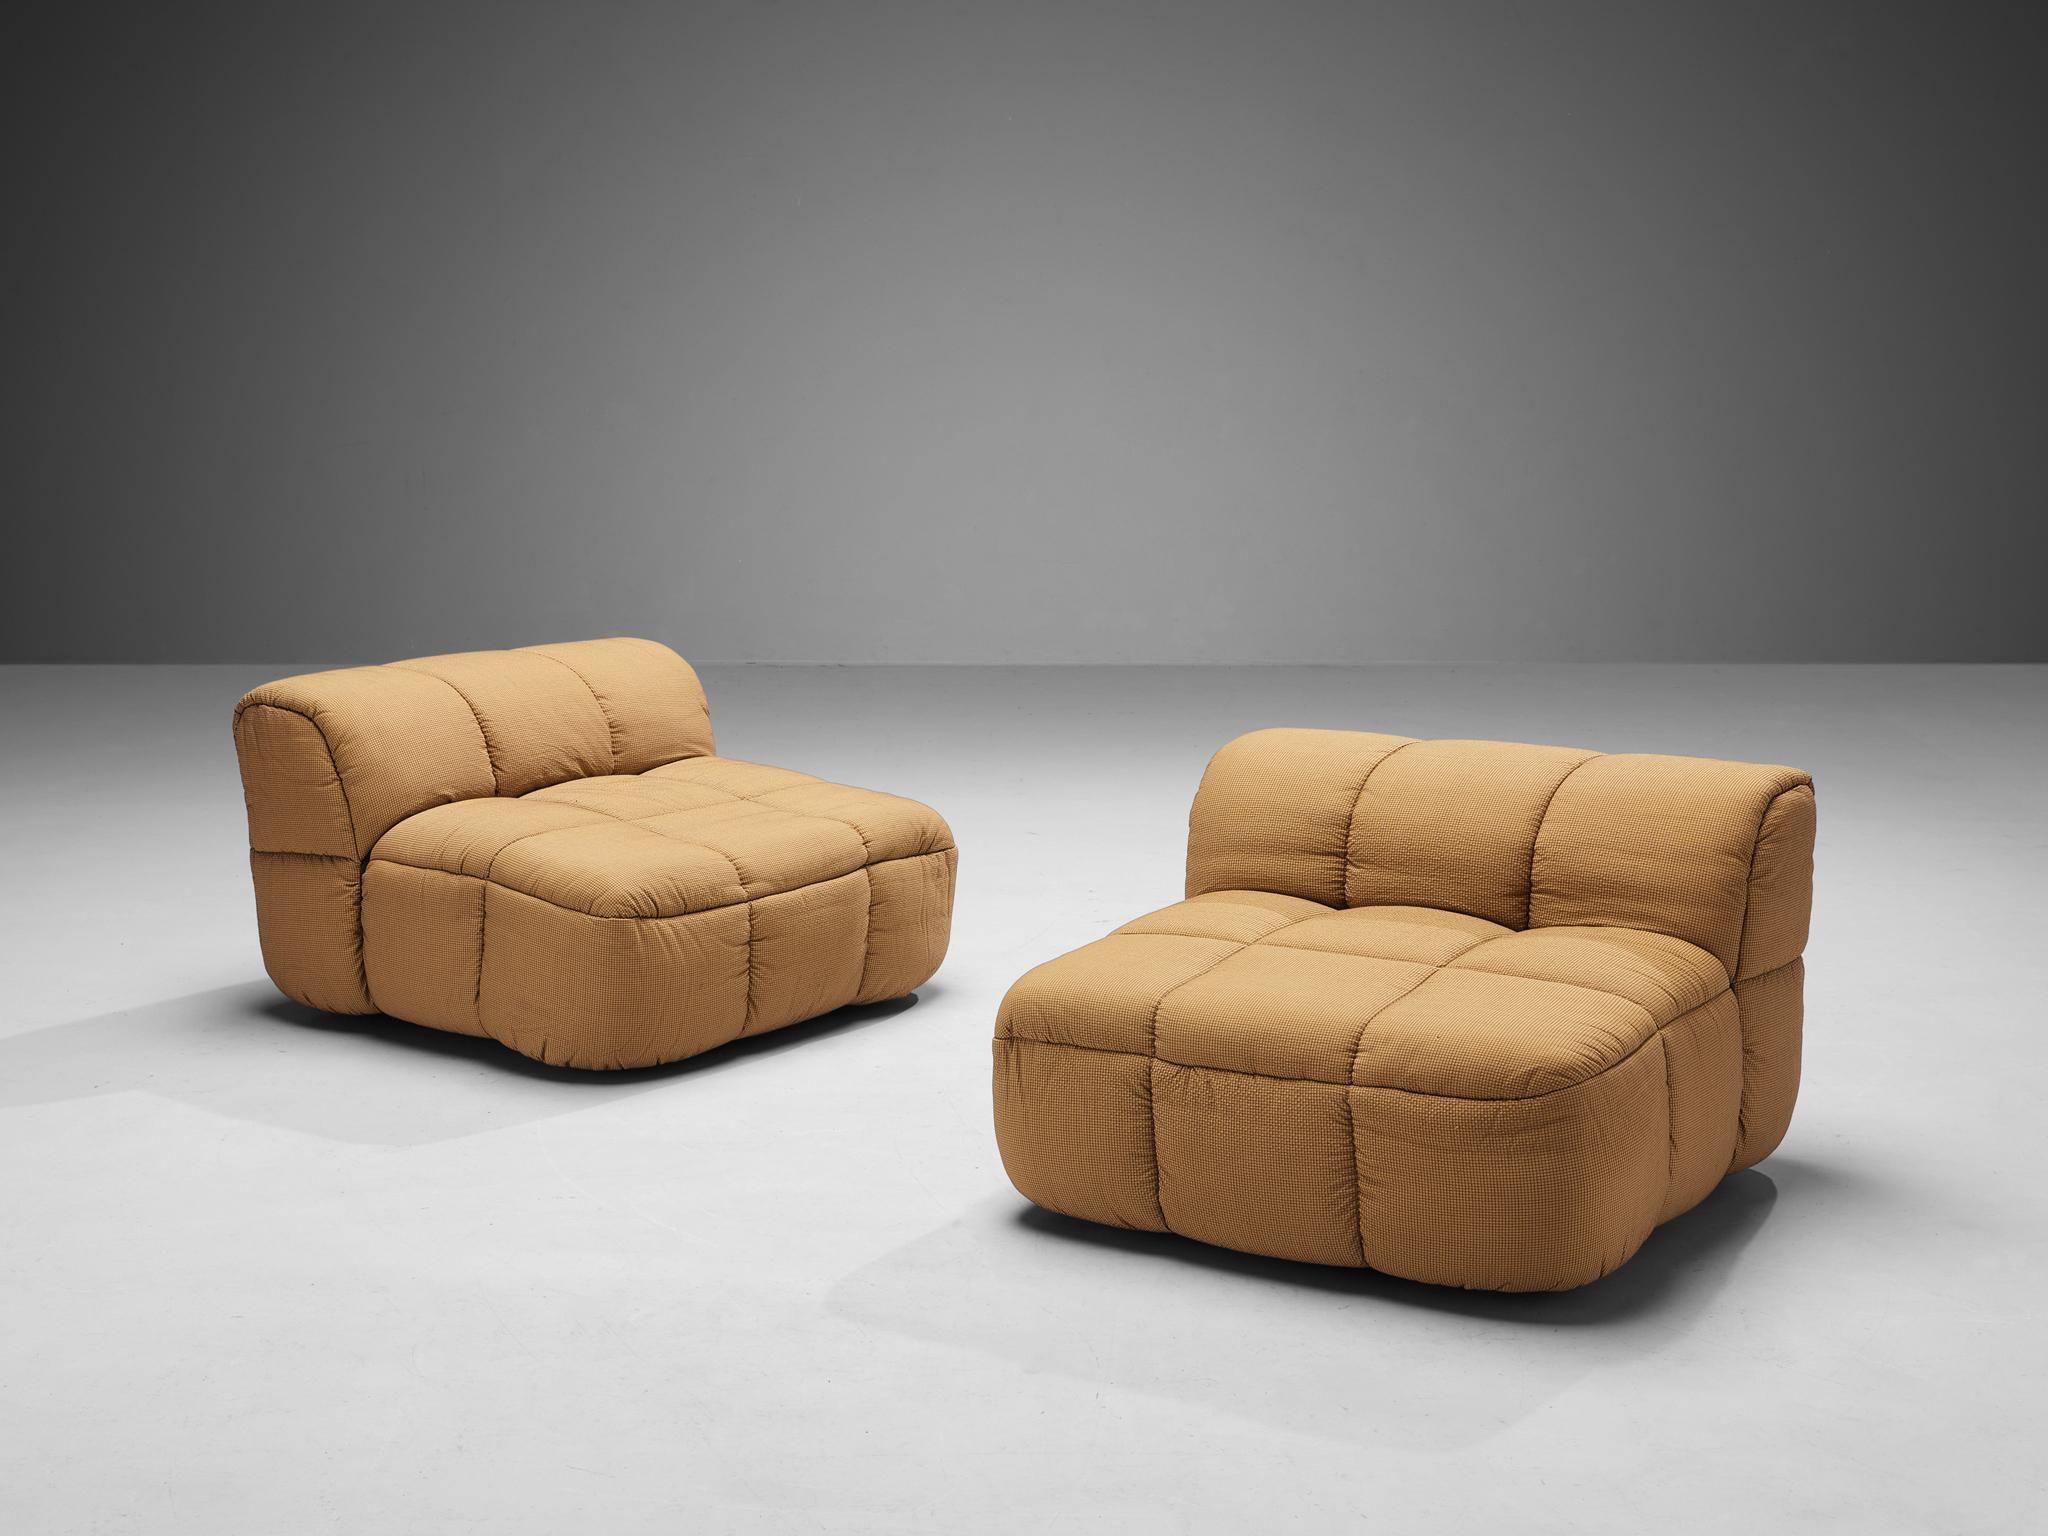 Late 20th Century Cini Boeri for Arflex Modular 'Strips' Pair of Two-Seater Elements